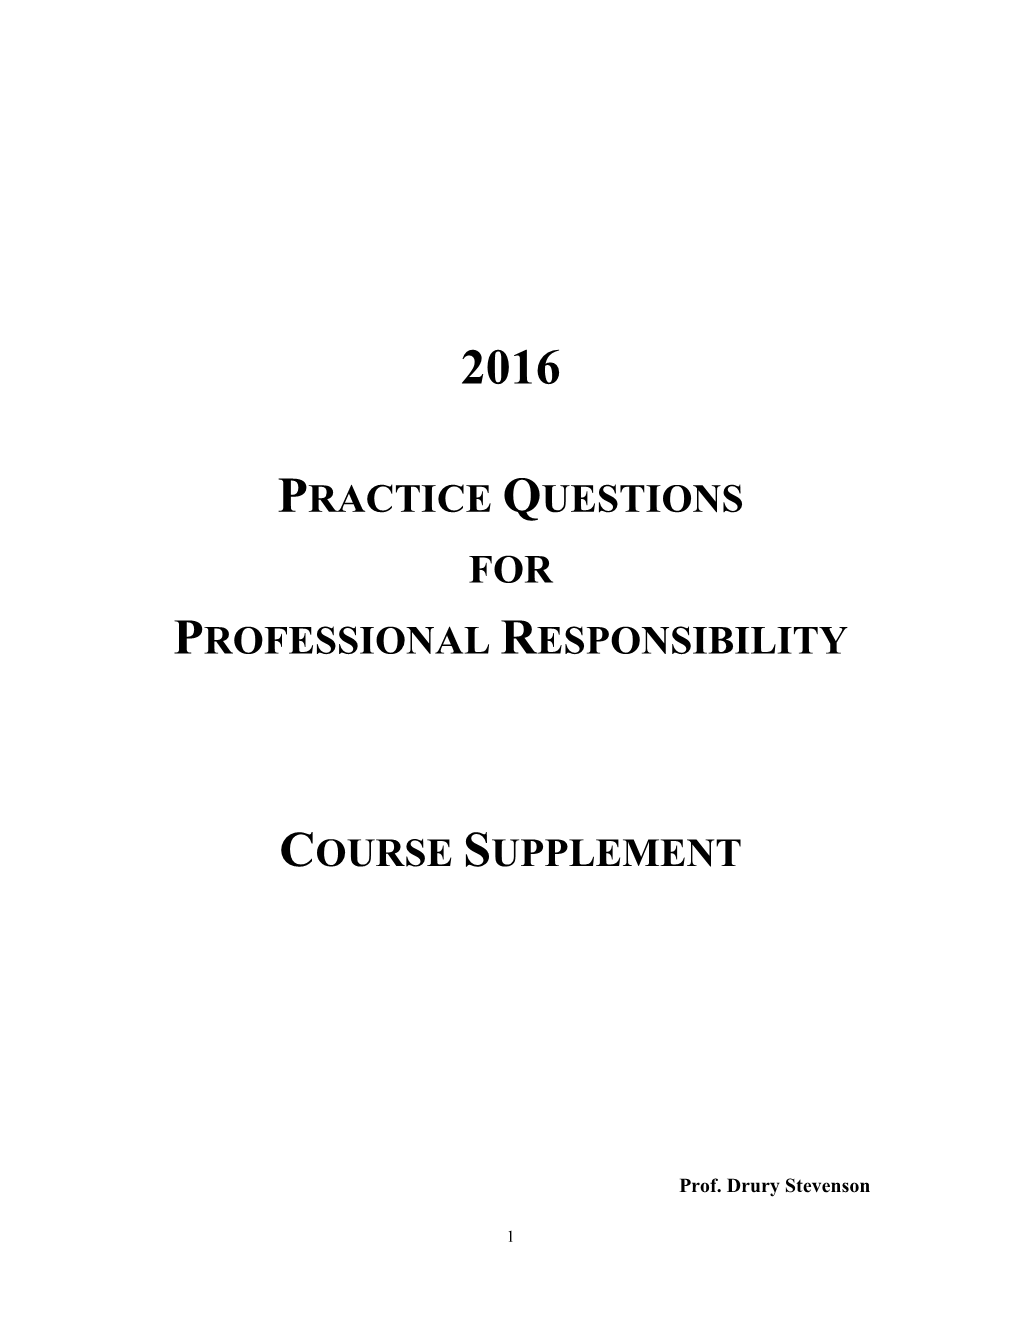 Practice Questions for Professional Responsibility